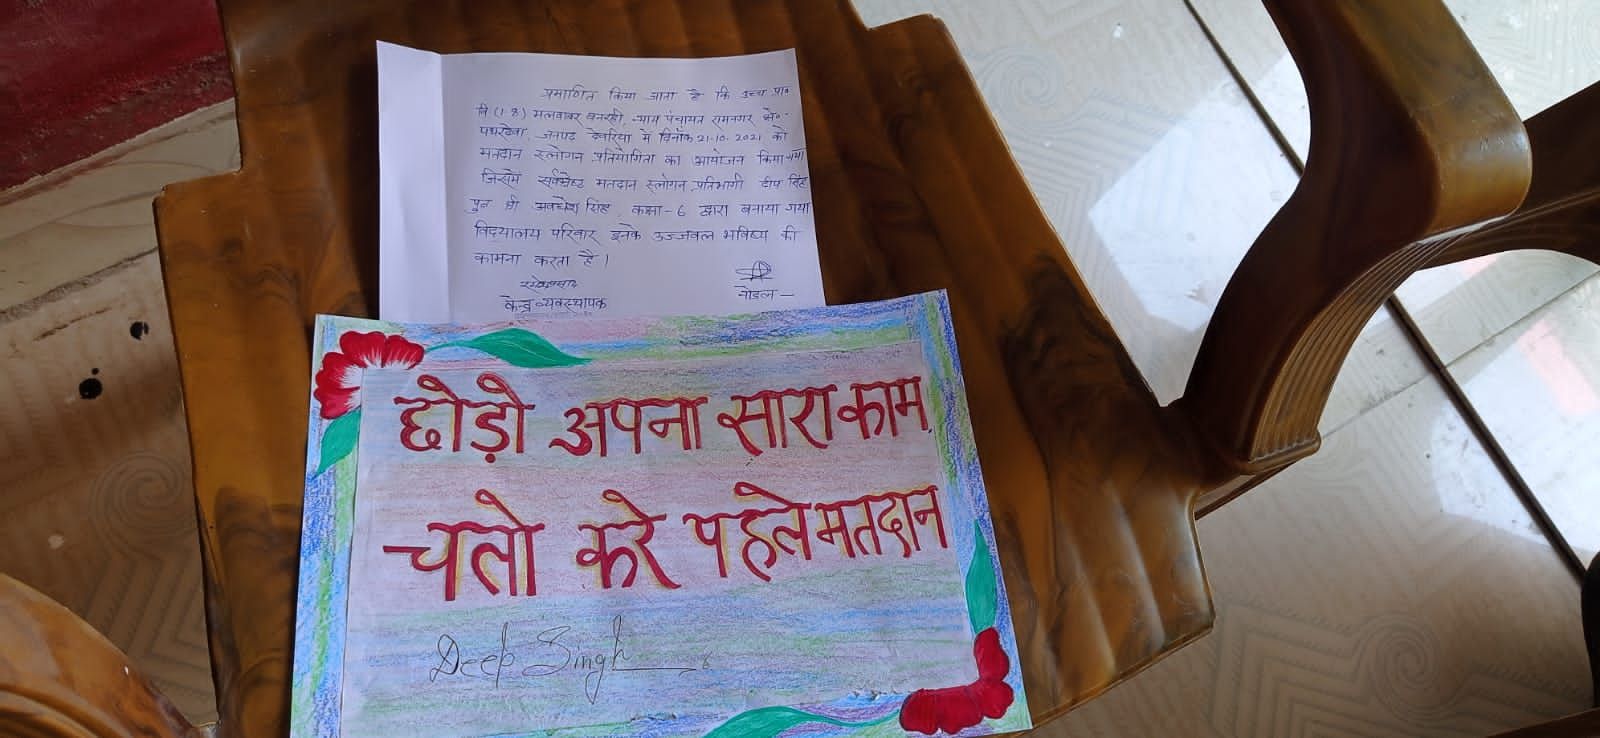 Slogan writing competition for voter awareness- Pathardeva Deoria